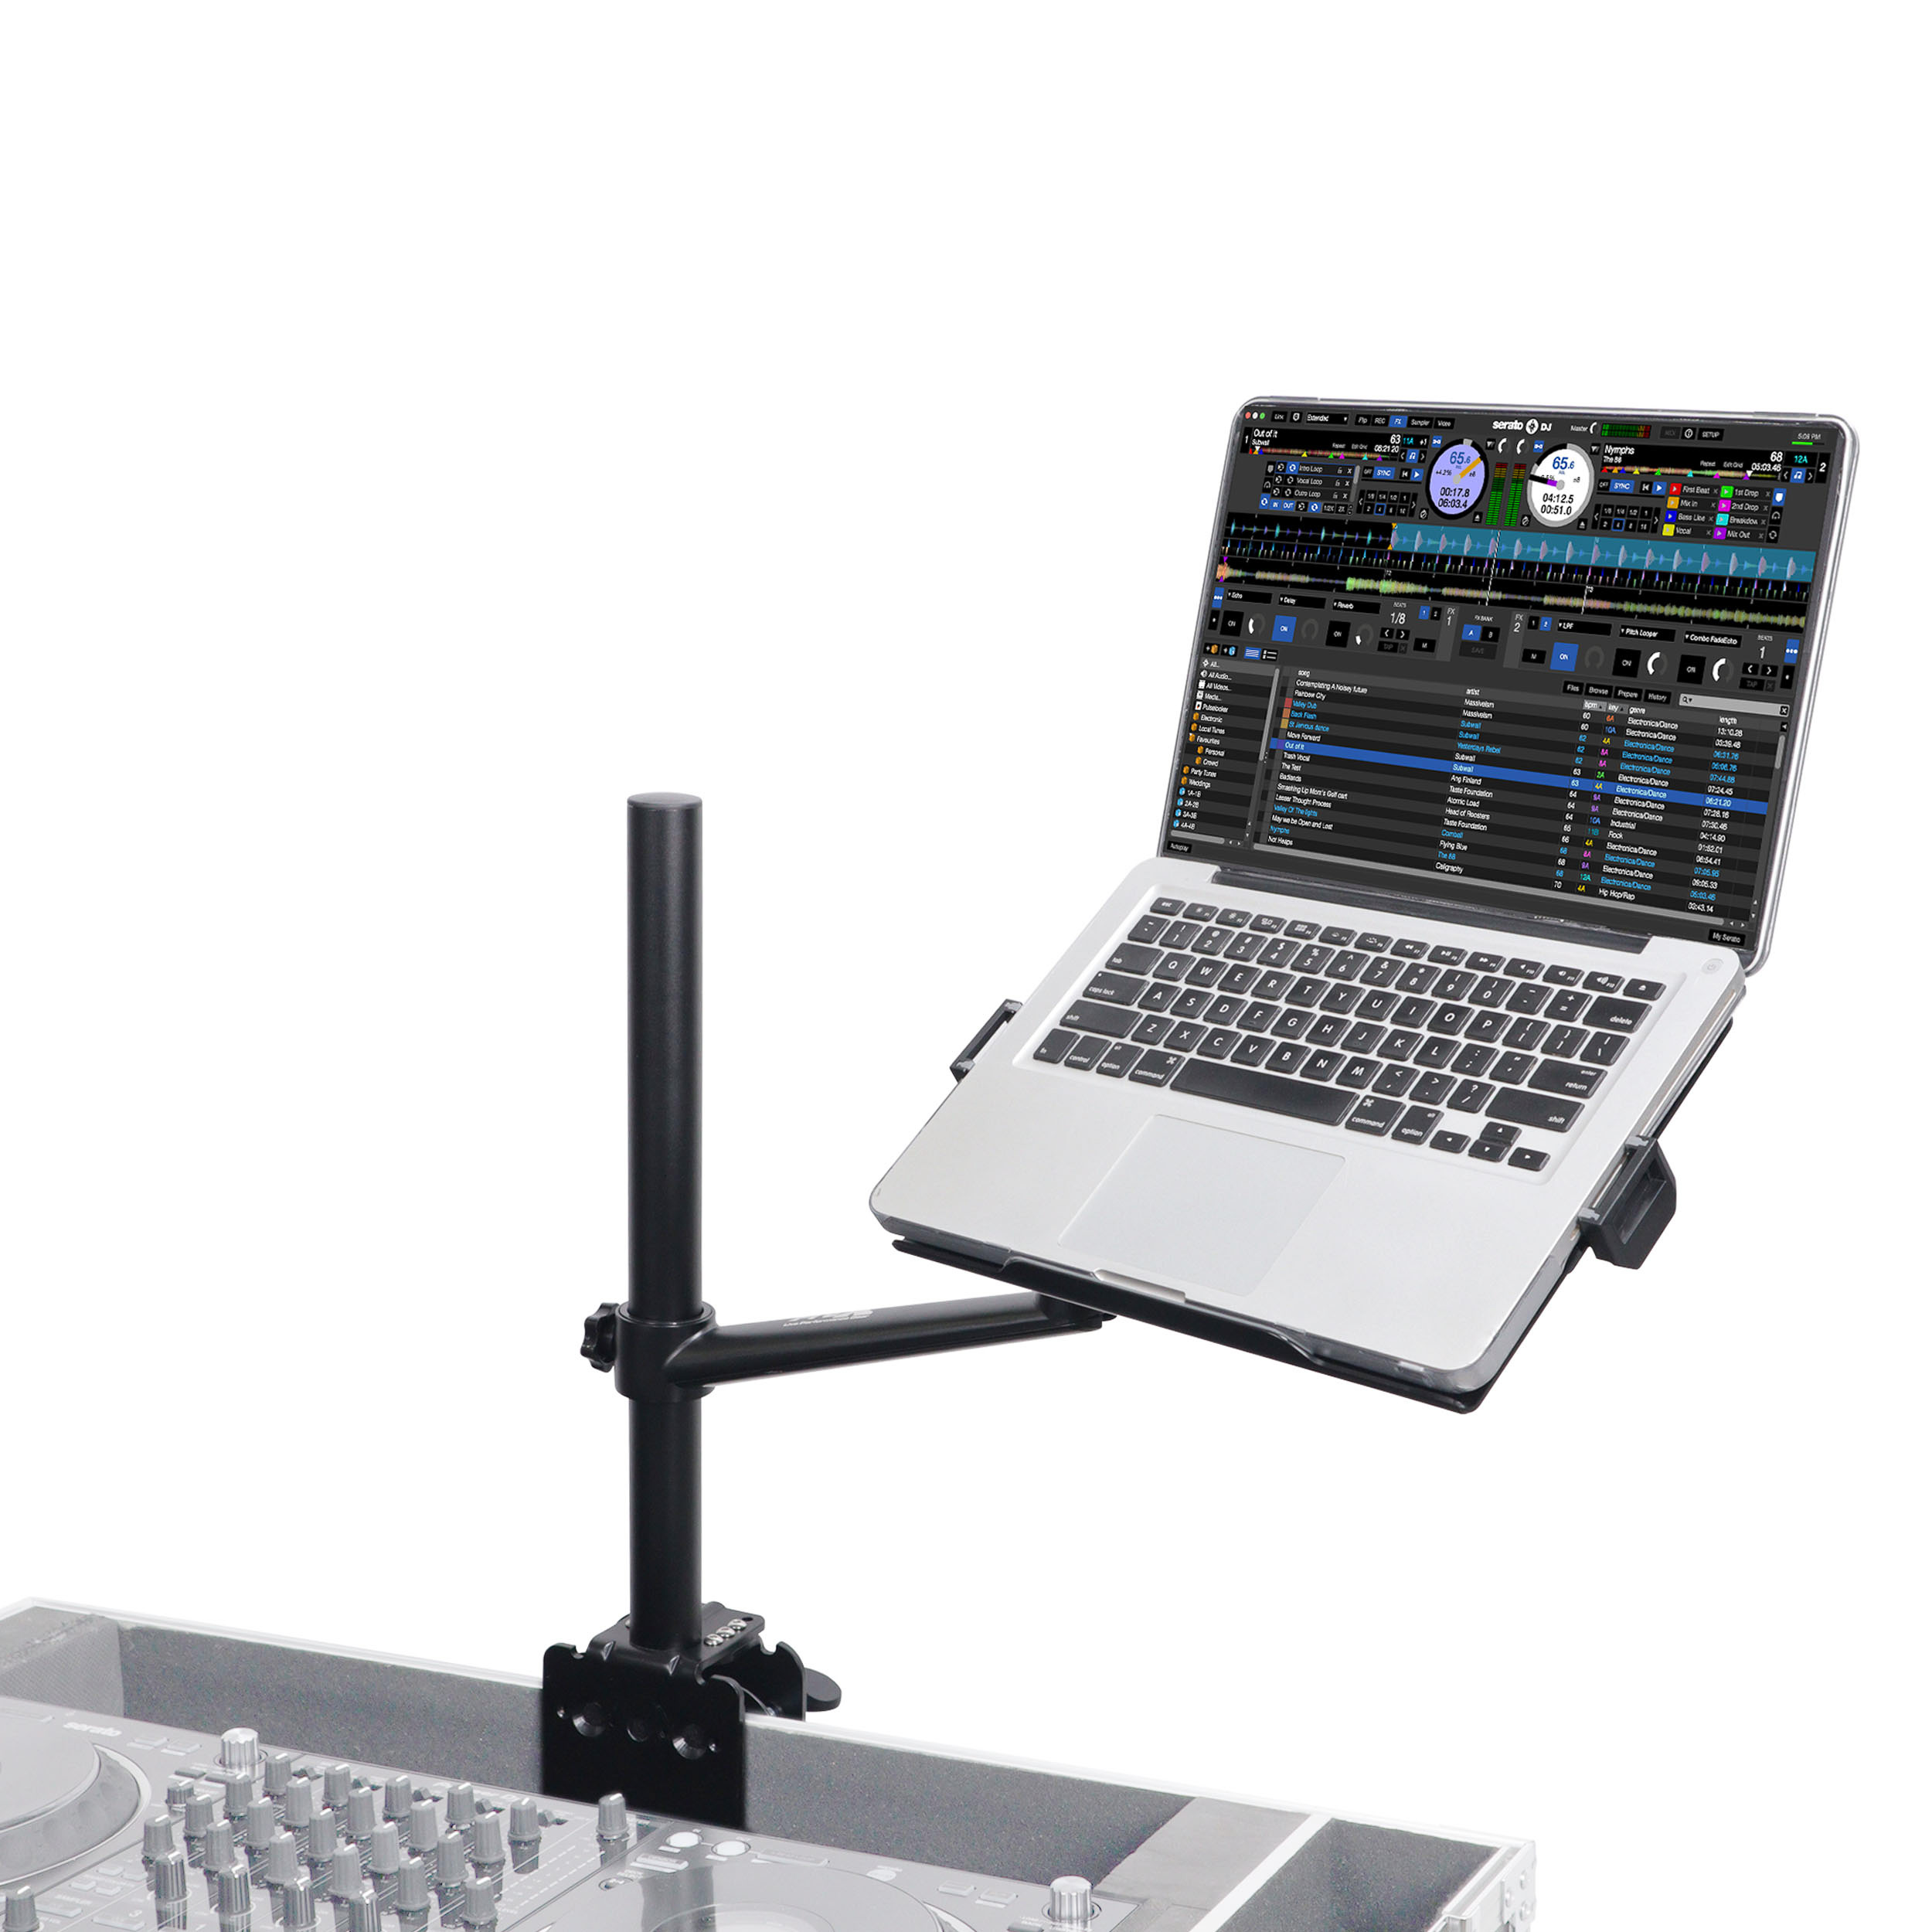 PROX X-FLEXARM BLK Universal Adjustable Stand for Laptops and Tablets,  Clamps Securely to Tables and DJ Cases for Ultimate Flexibility